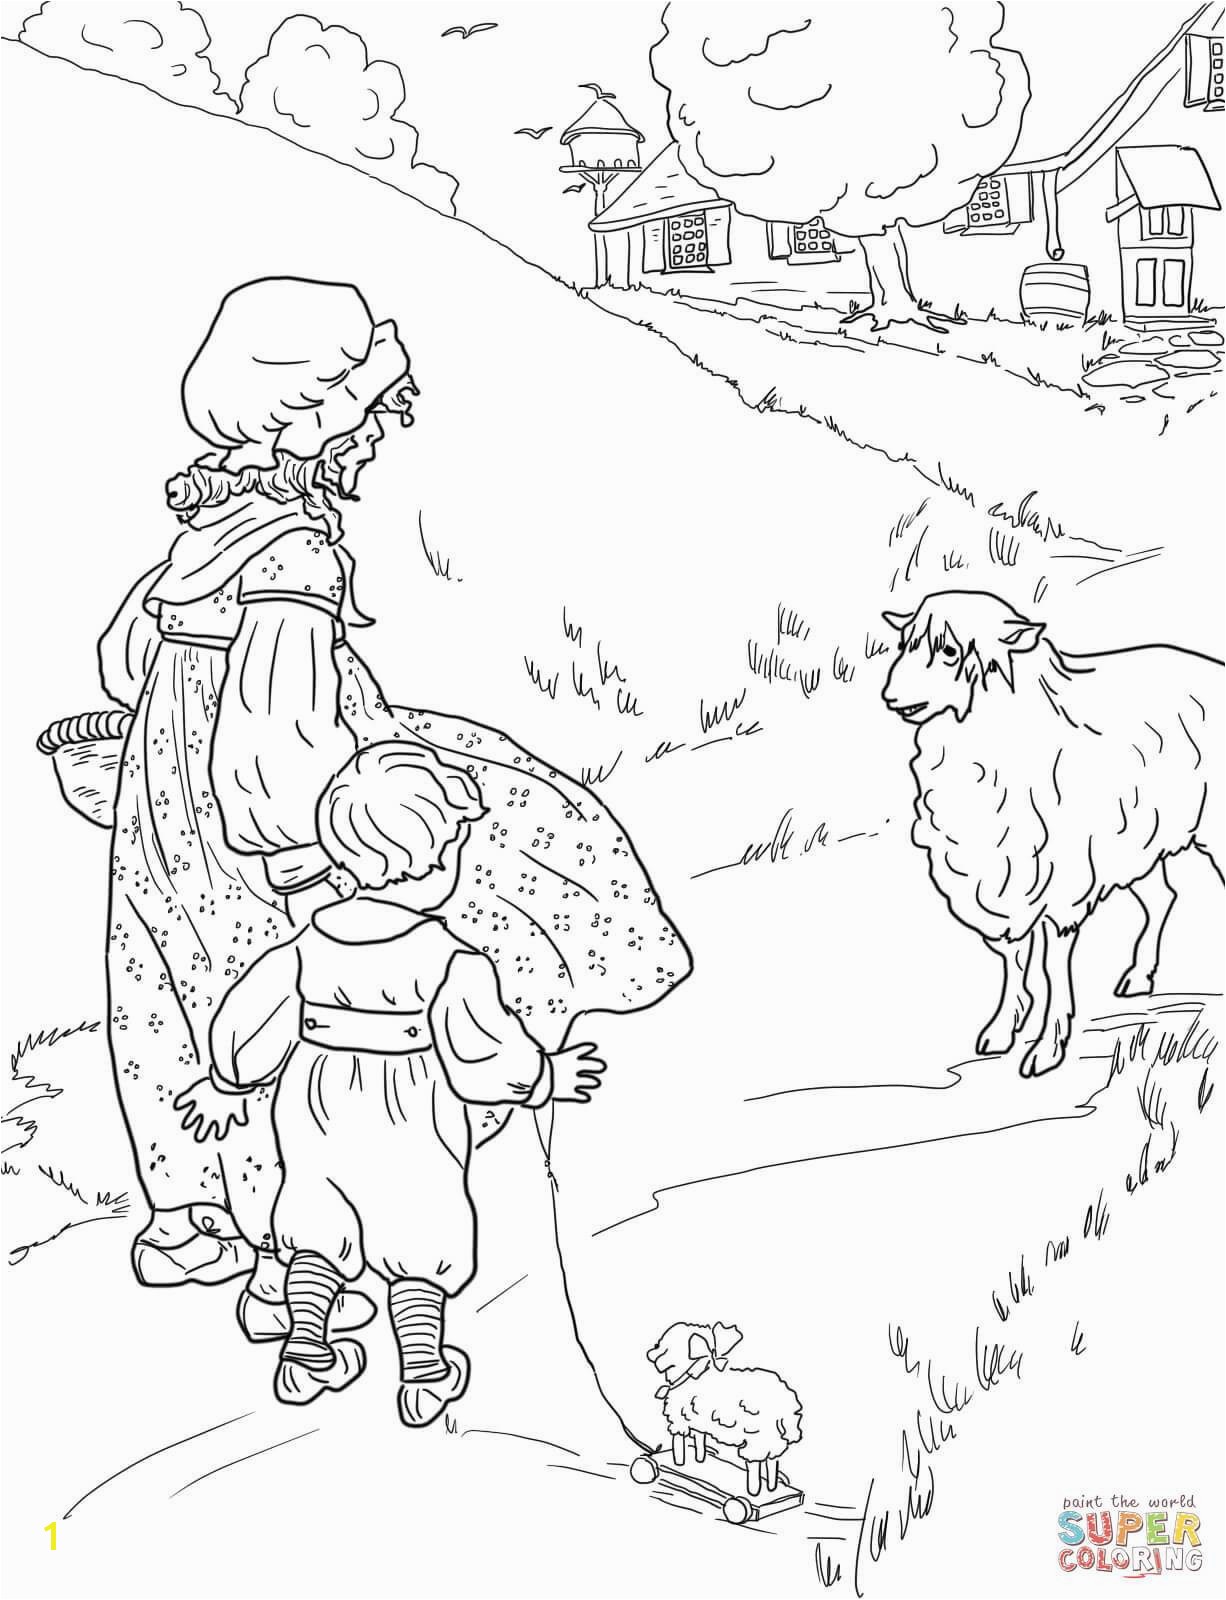 Lamb Coloring Pages Printable Best the Best Lamb Coloring Printable Page Pics Lost Sheep Trend